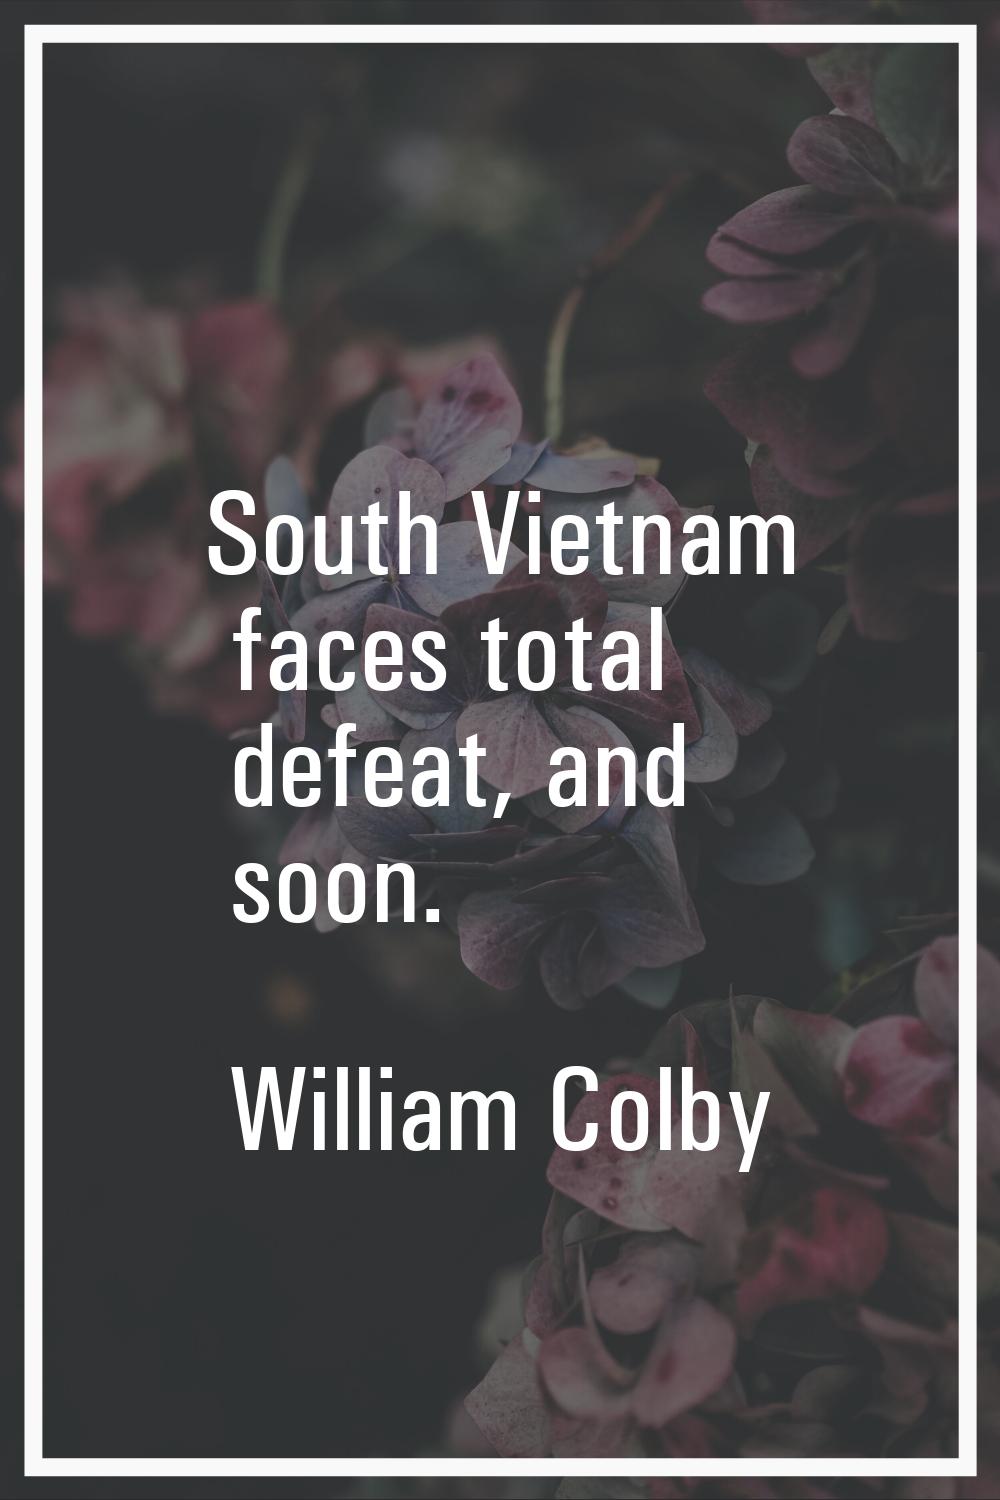 South Vietnam faces total defeat, and soon.